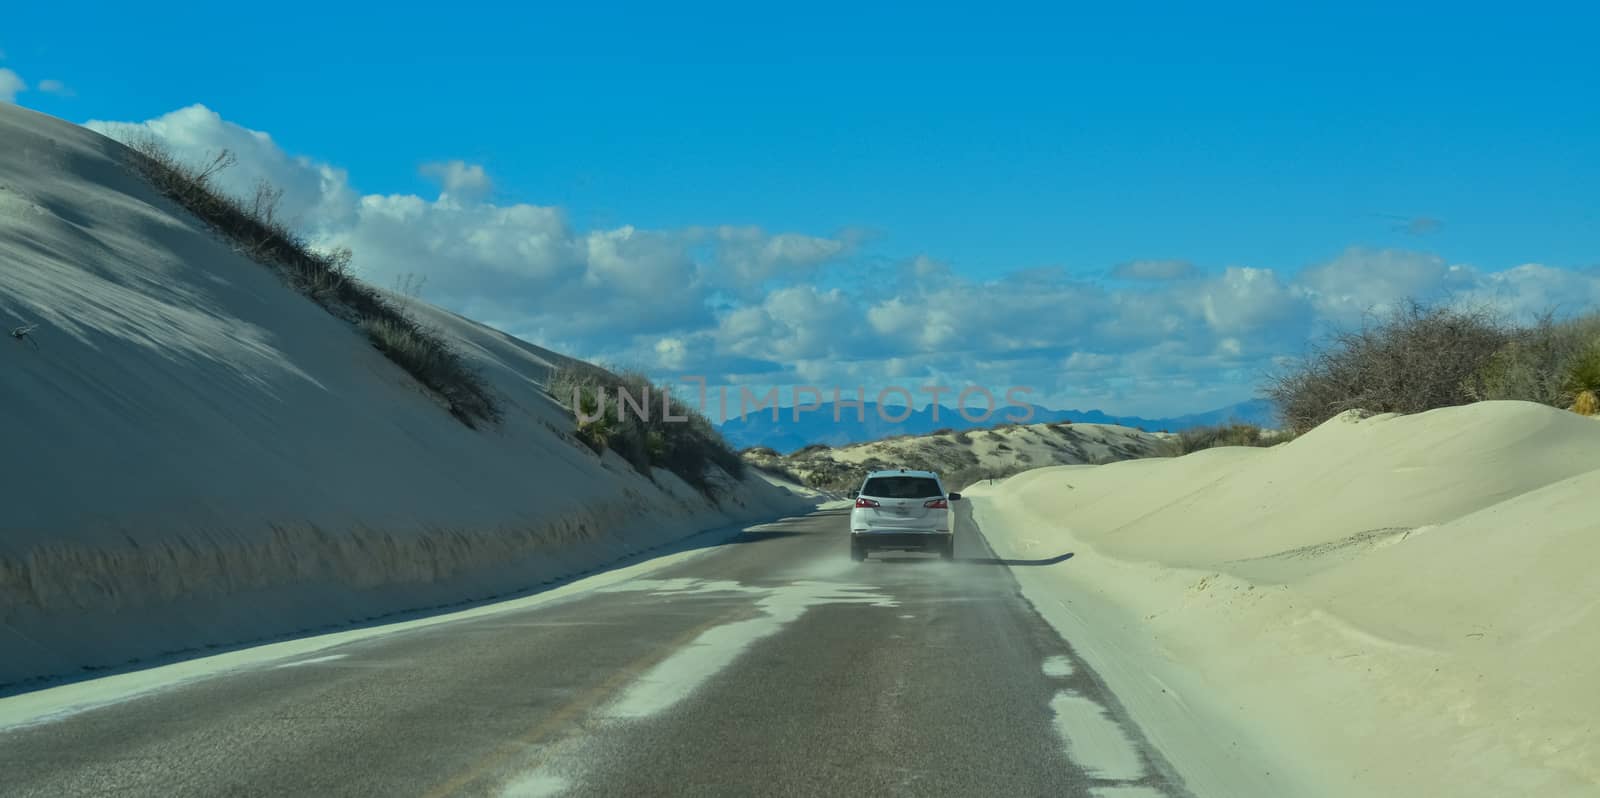 car rides the harms of sand dunes from gypsum to White Sands National Monument, New Mexico, USA by Hydrobiolog